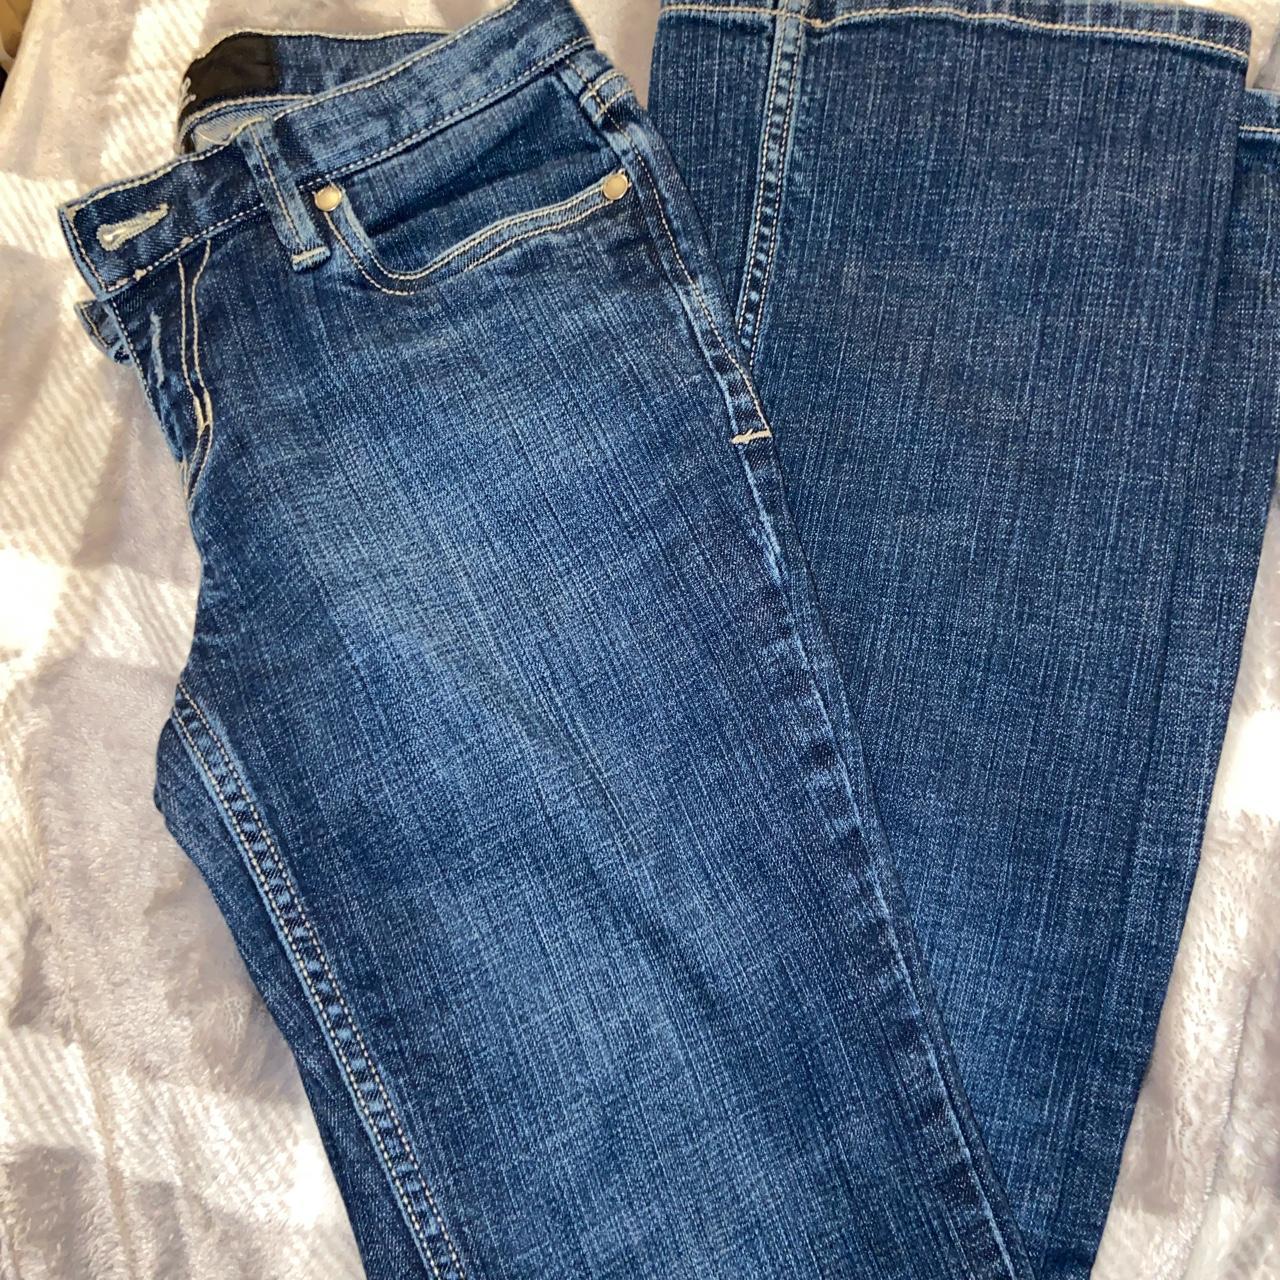 Mossimo Women's Navy and Blue Jeans | Depop